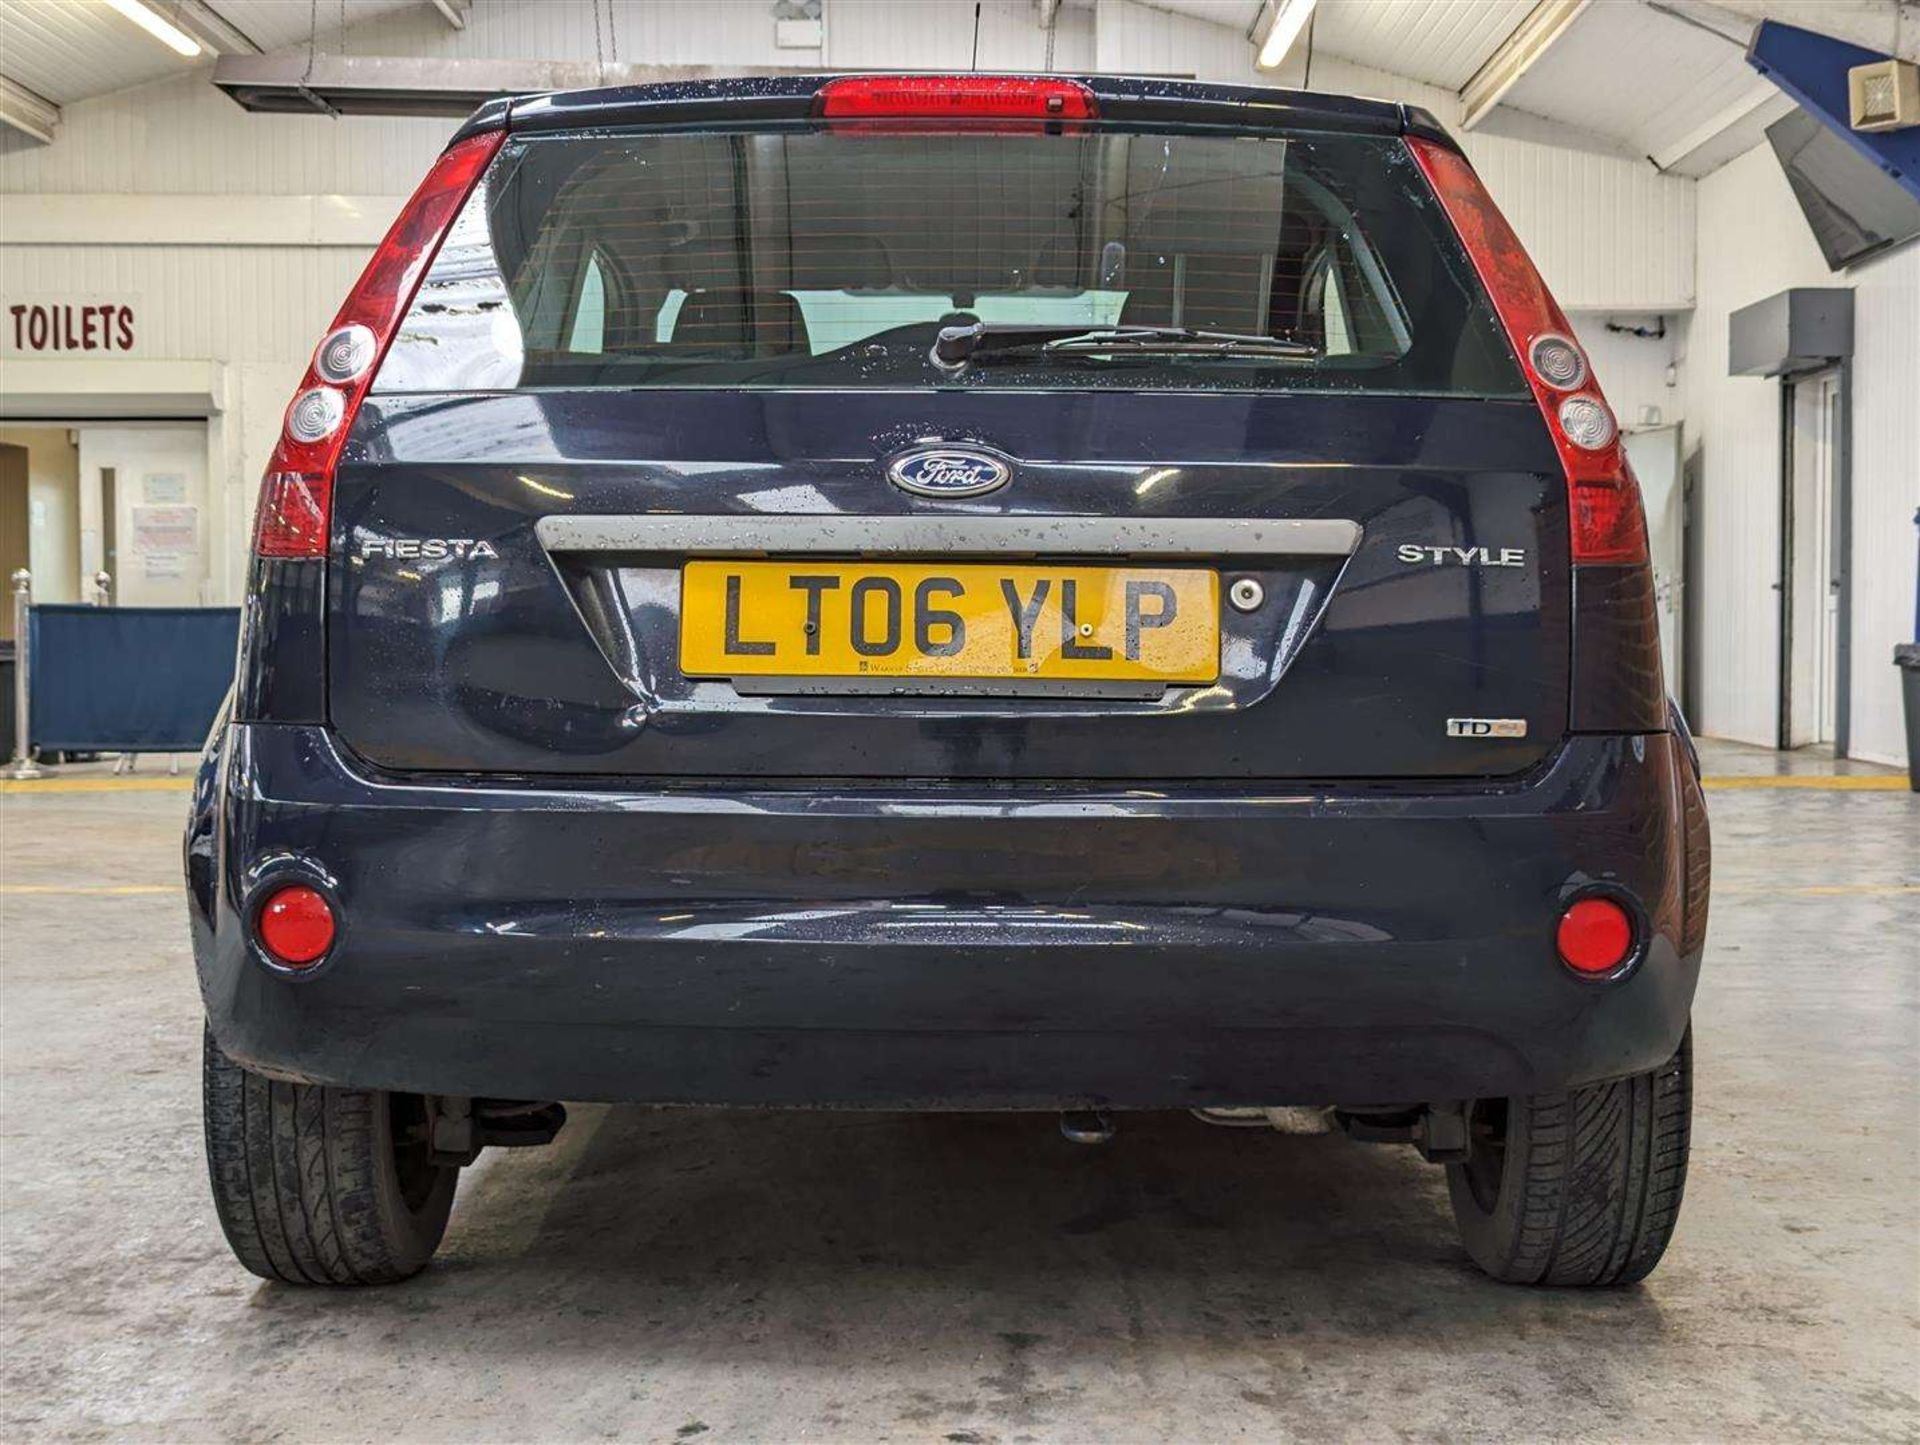 2006 FORD FIESTA STYLE TDCI - Image 3 of 30